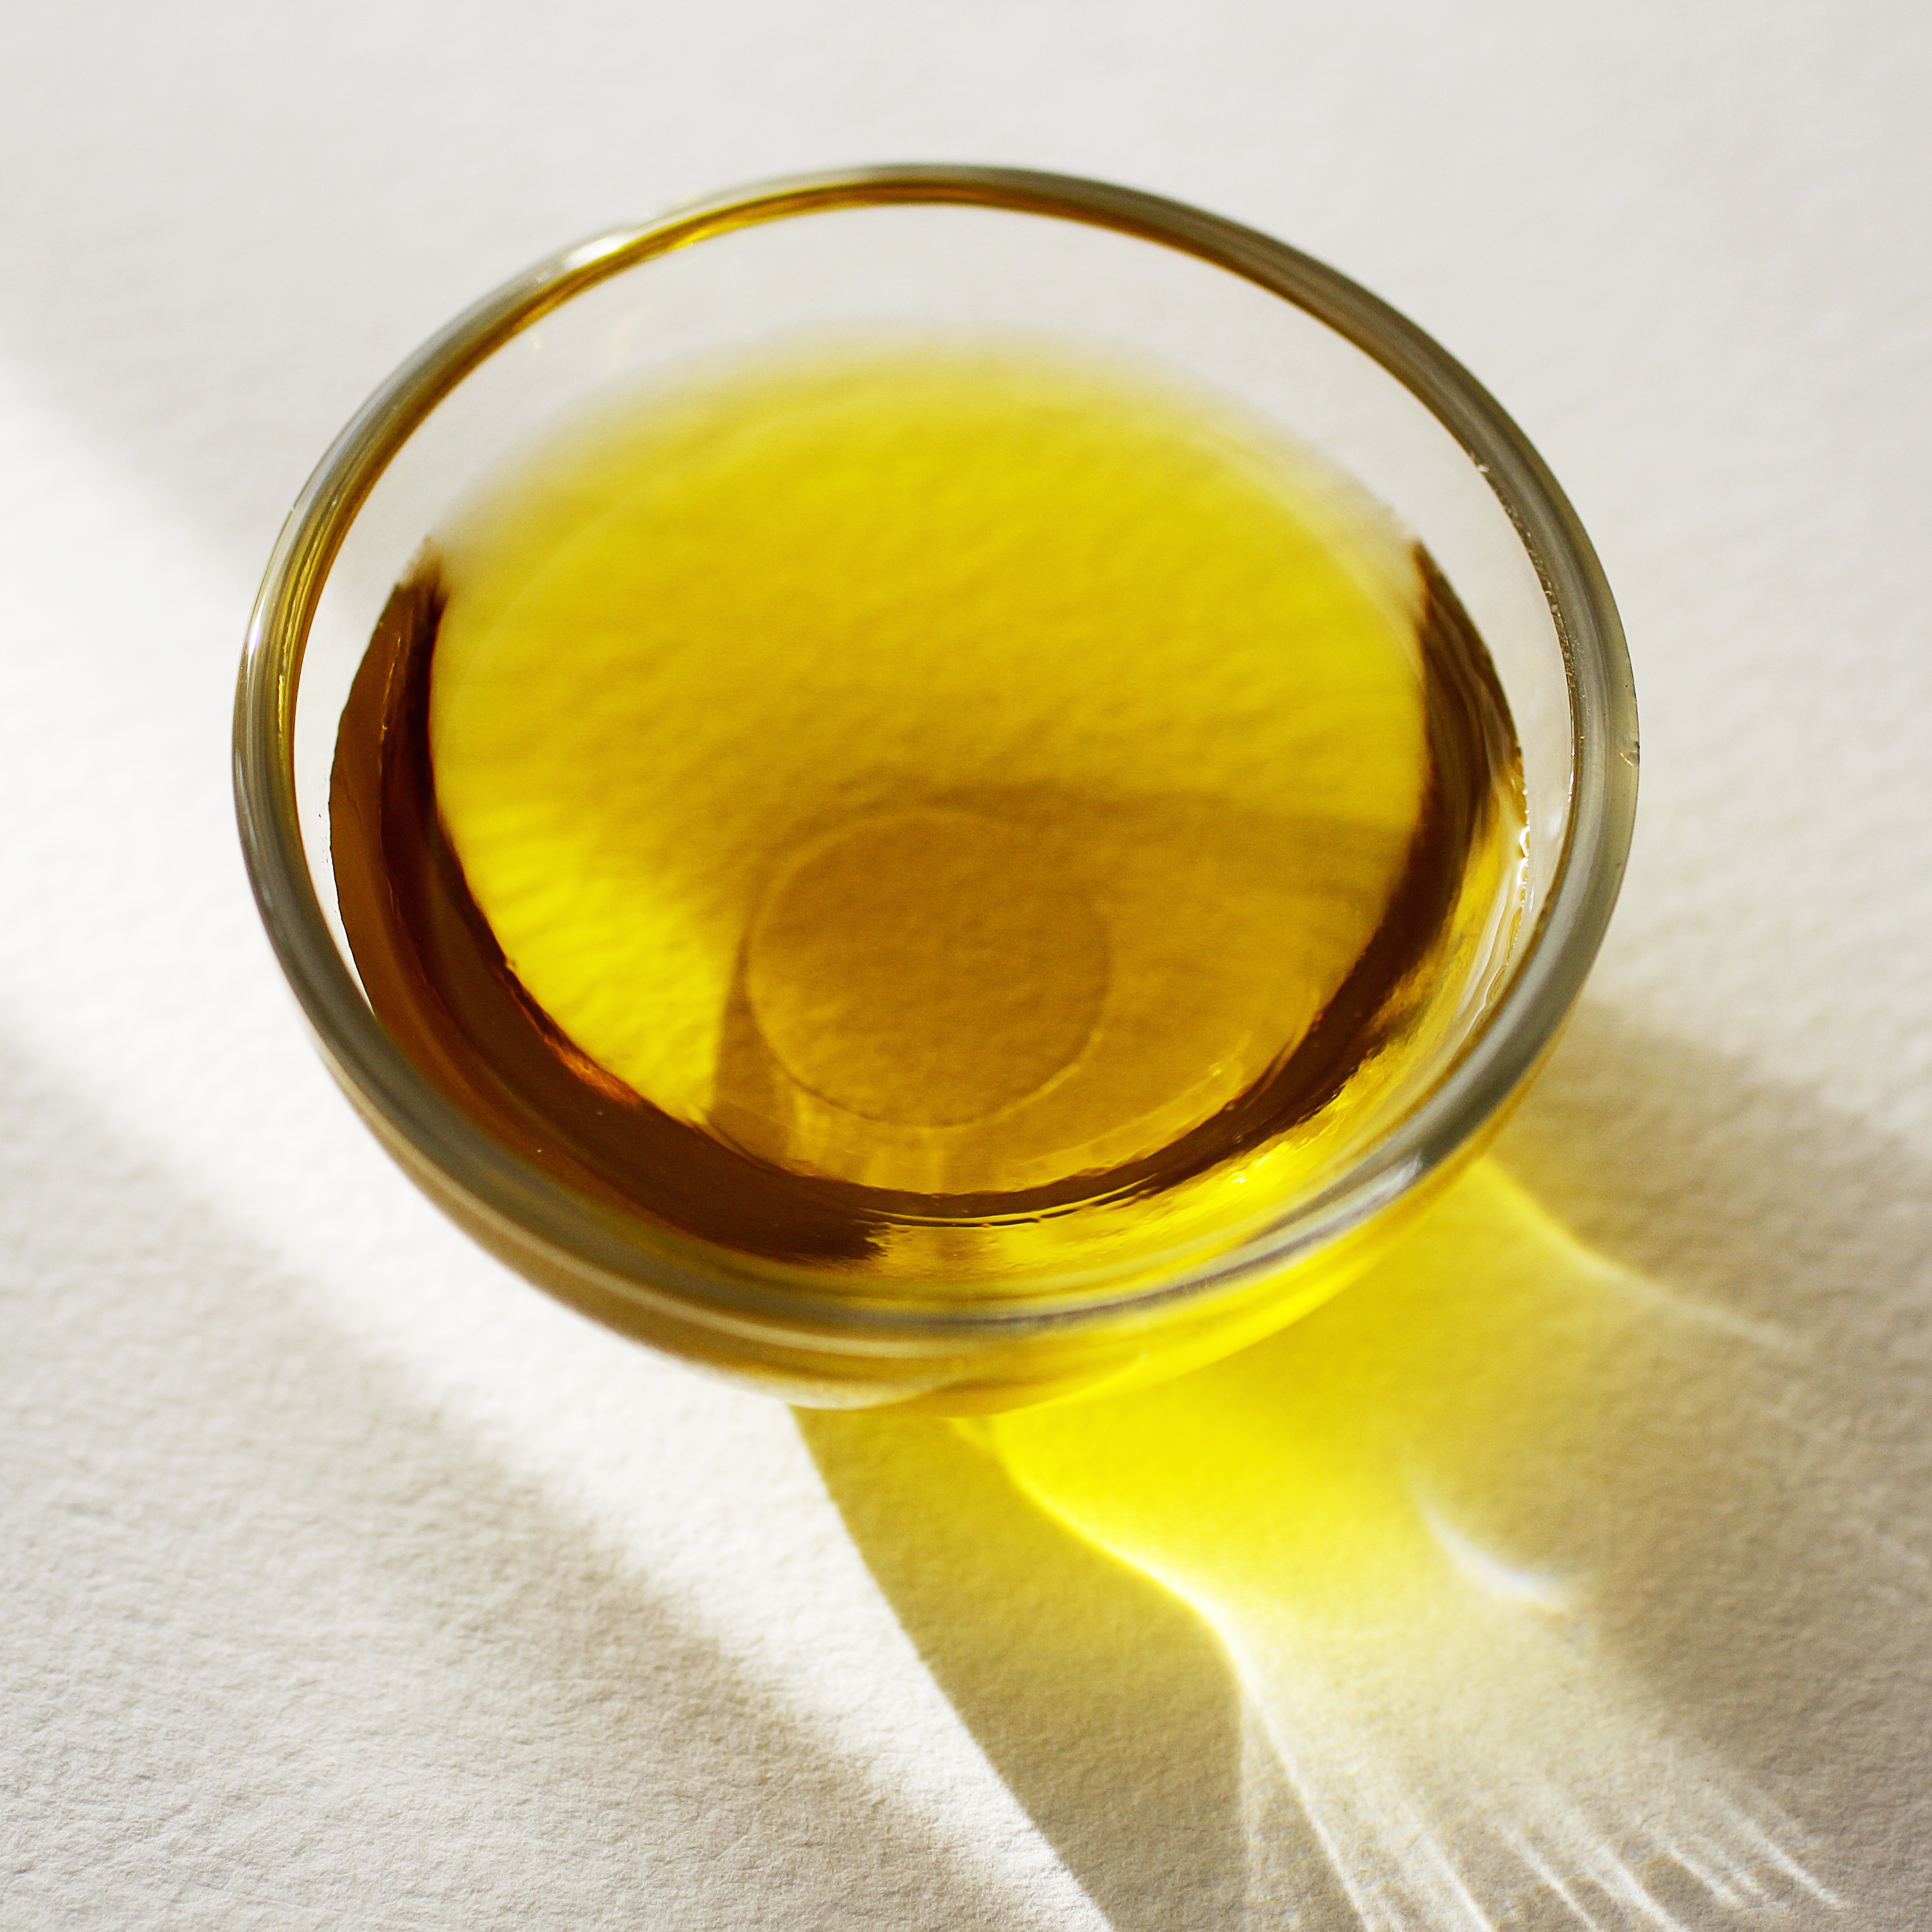 olive oil and vitamin e capsules for hair growth